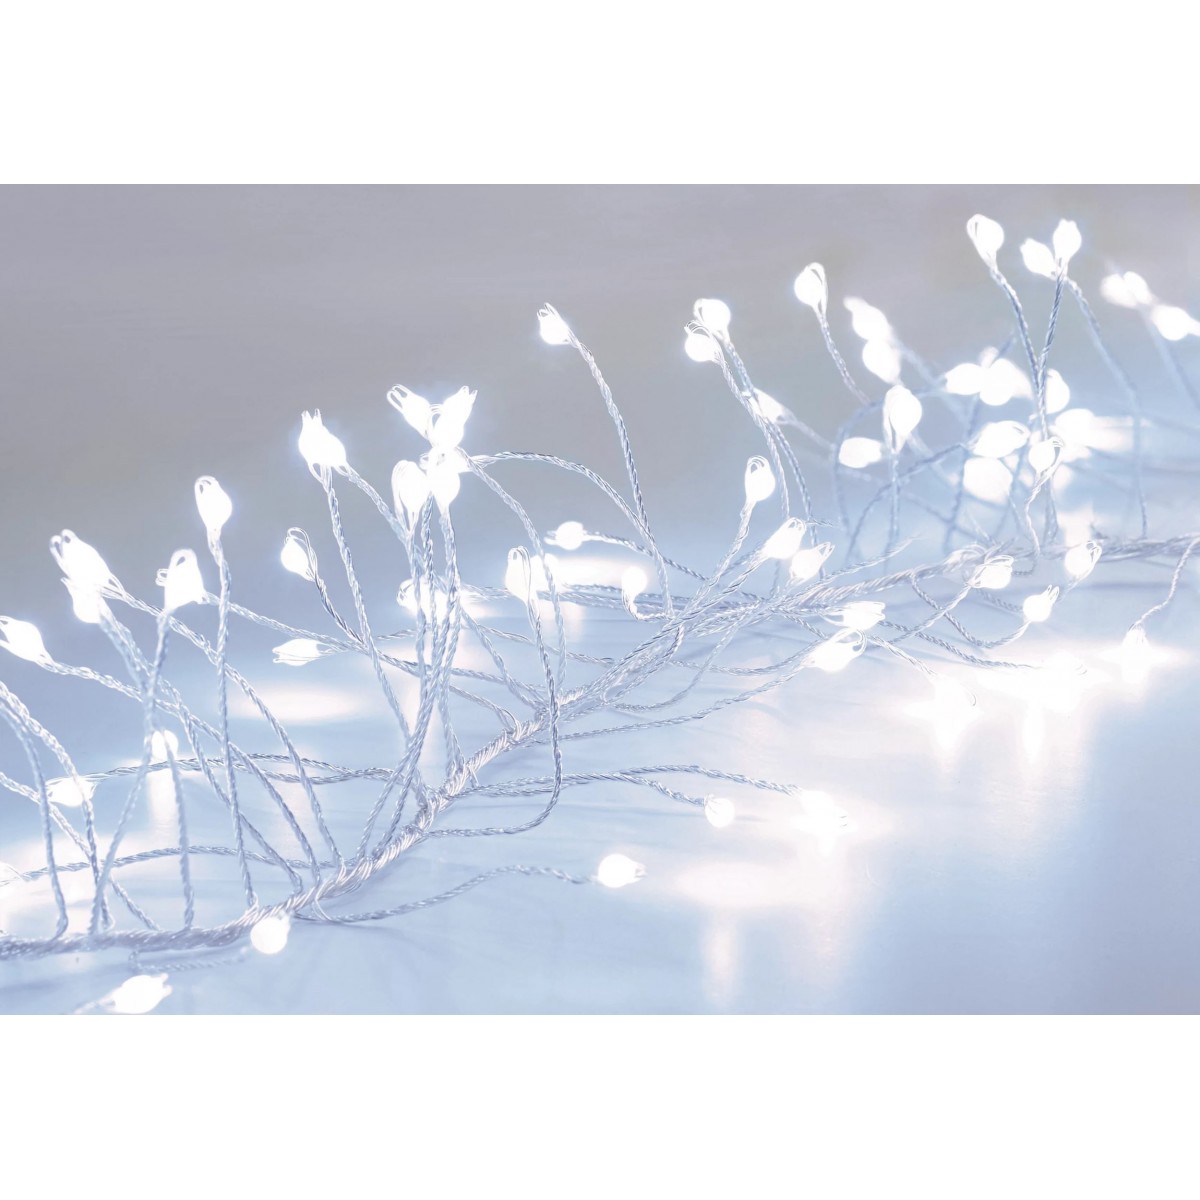 430 Cool White Garland Cluster Micro ultra bright Outdoor LED Lights - Silver Gold pin wire String